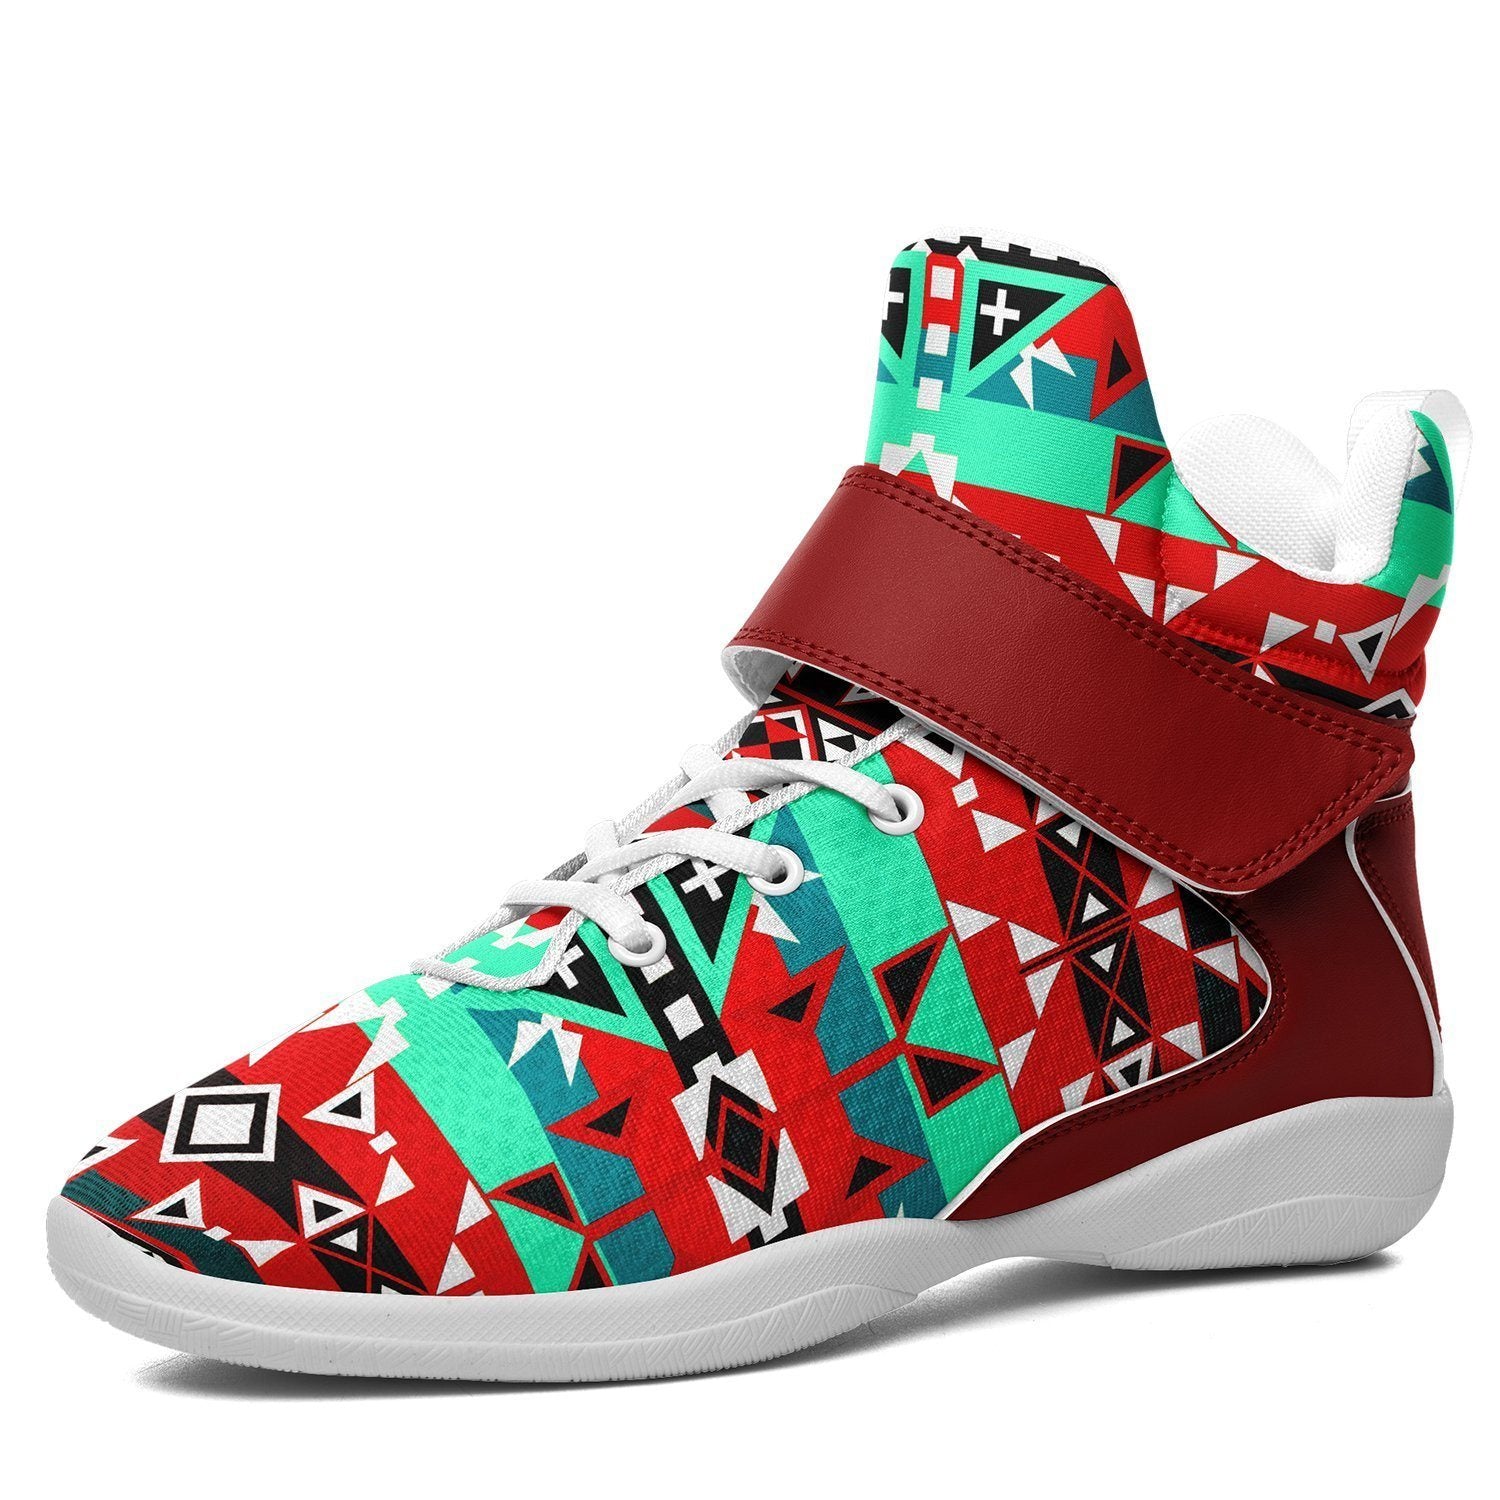 After the Southwest Rain Ipottaa Basketball / Sport High Top Shoes - White Sole 49 Dzine US Men 7 / EUR 40 White Sole with Dark Red Strap 